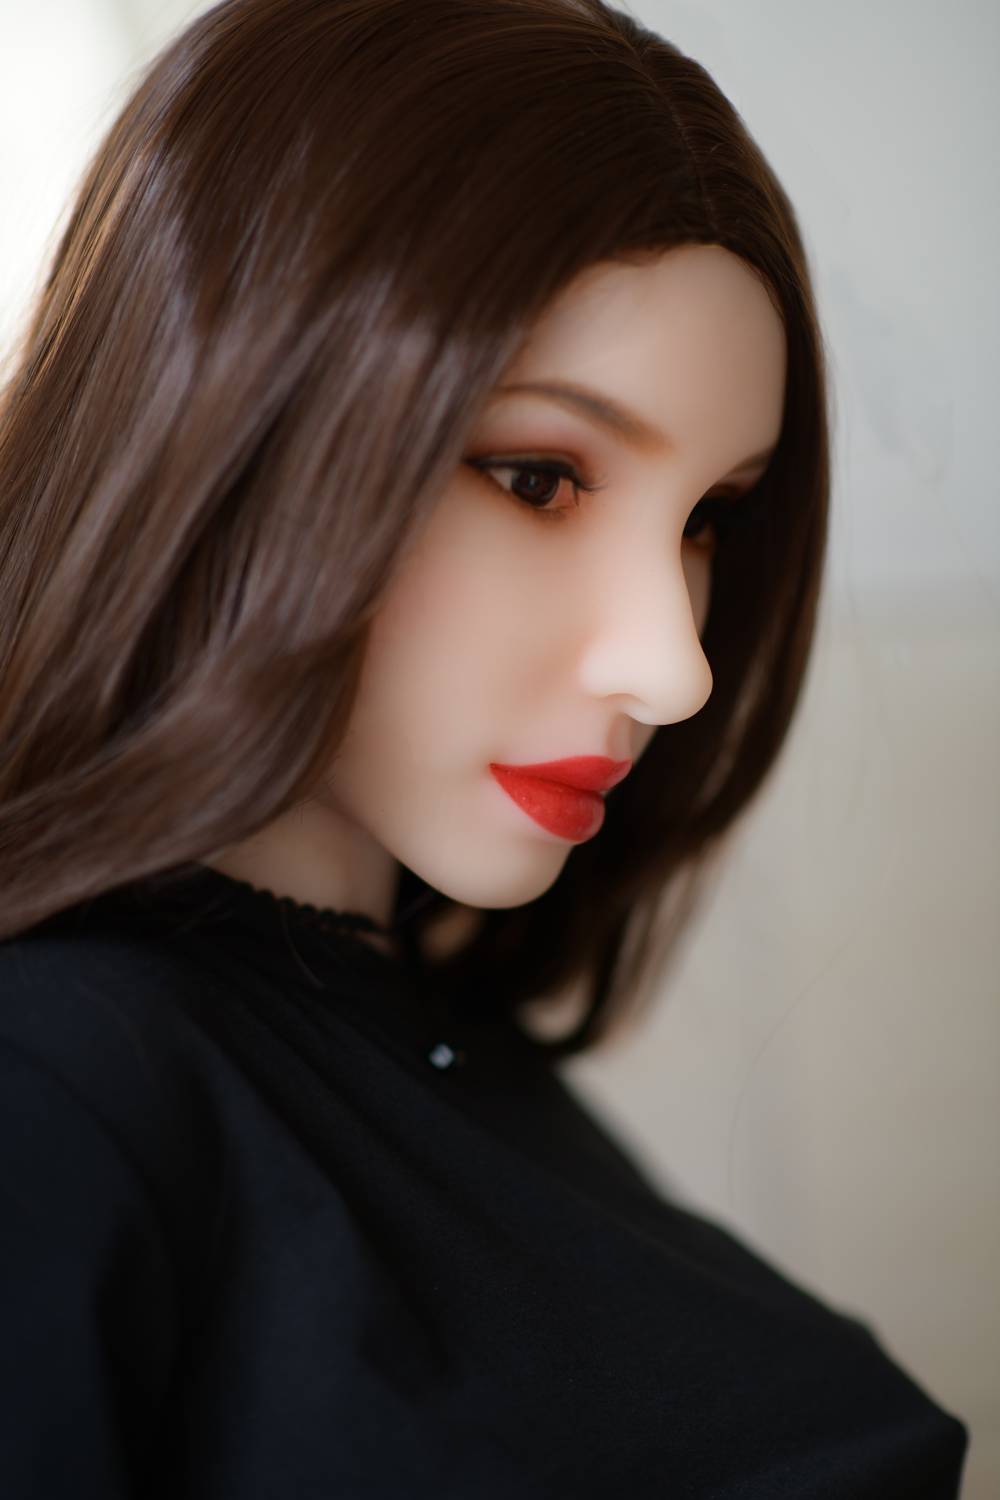 Caucasian Doll Girl with Big Lips